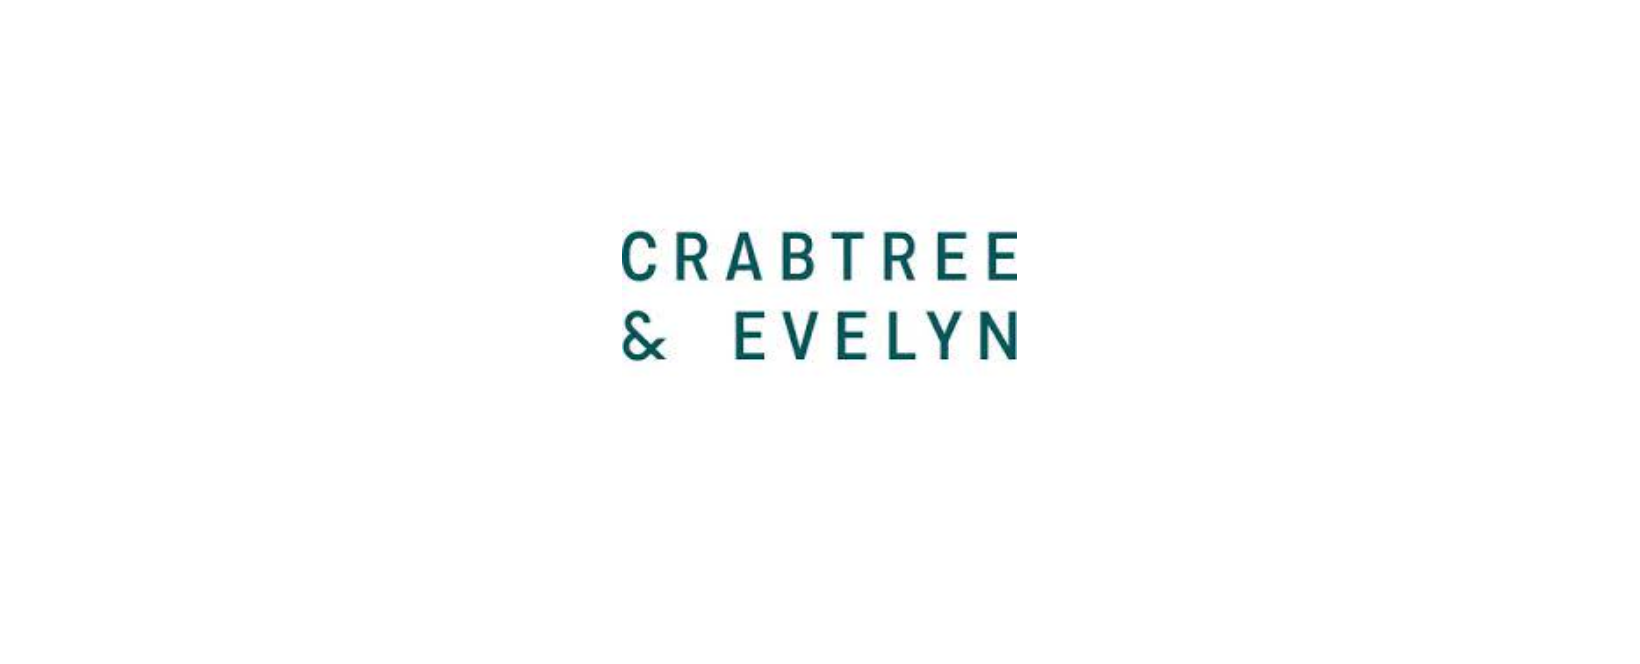 Crabtree & Evelyn Discount Code 2022